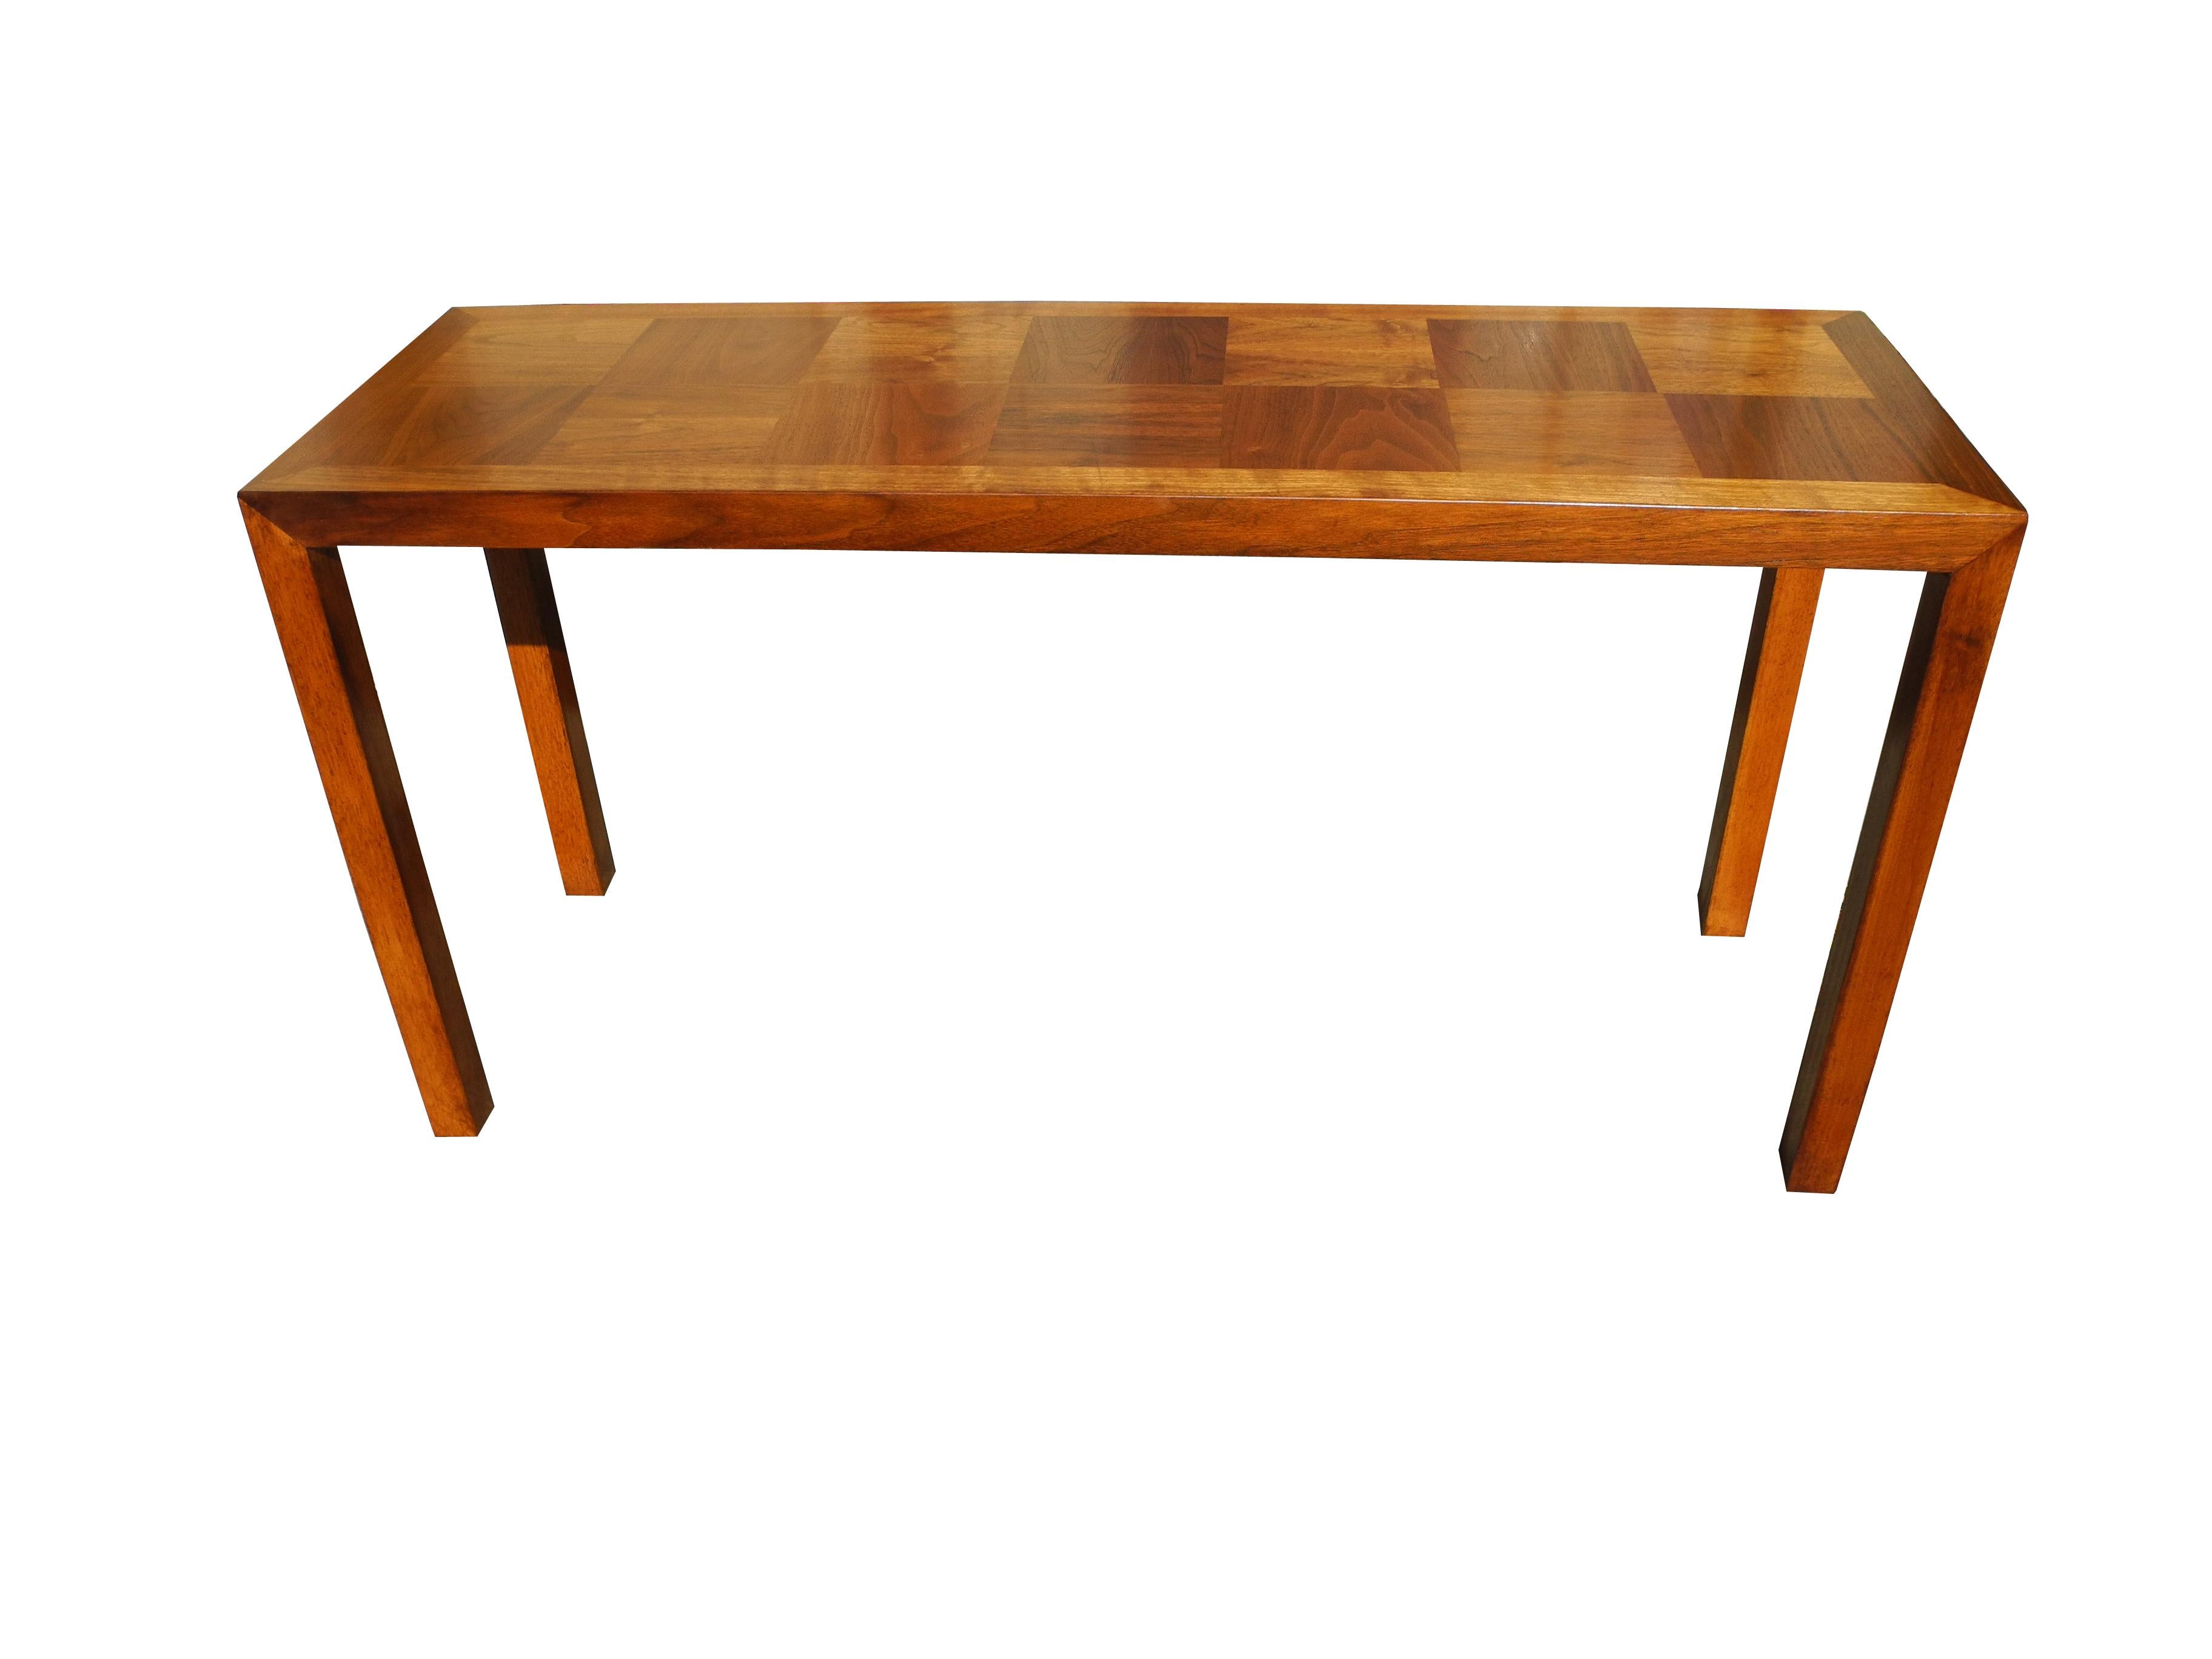 20th Century Mid-Century Modern Parson's Style Walnut Console with Parquet Top, 1950s For Sale